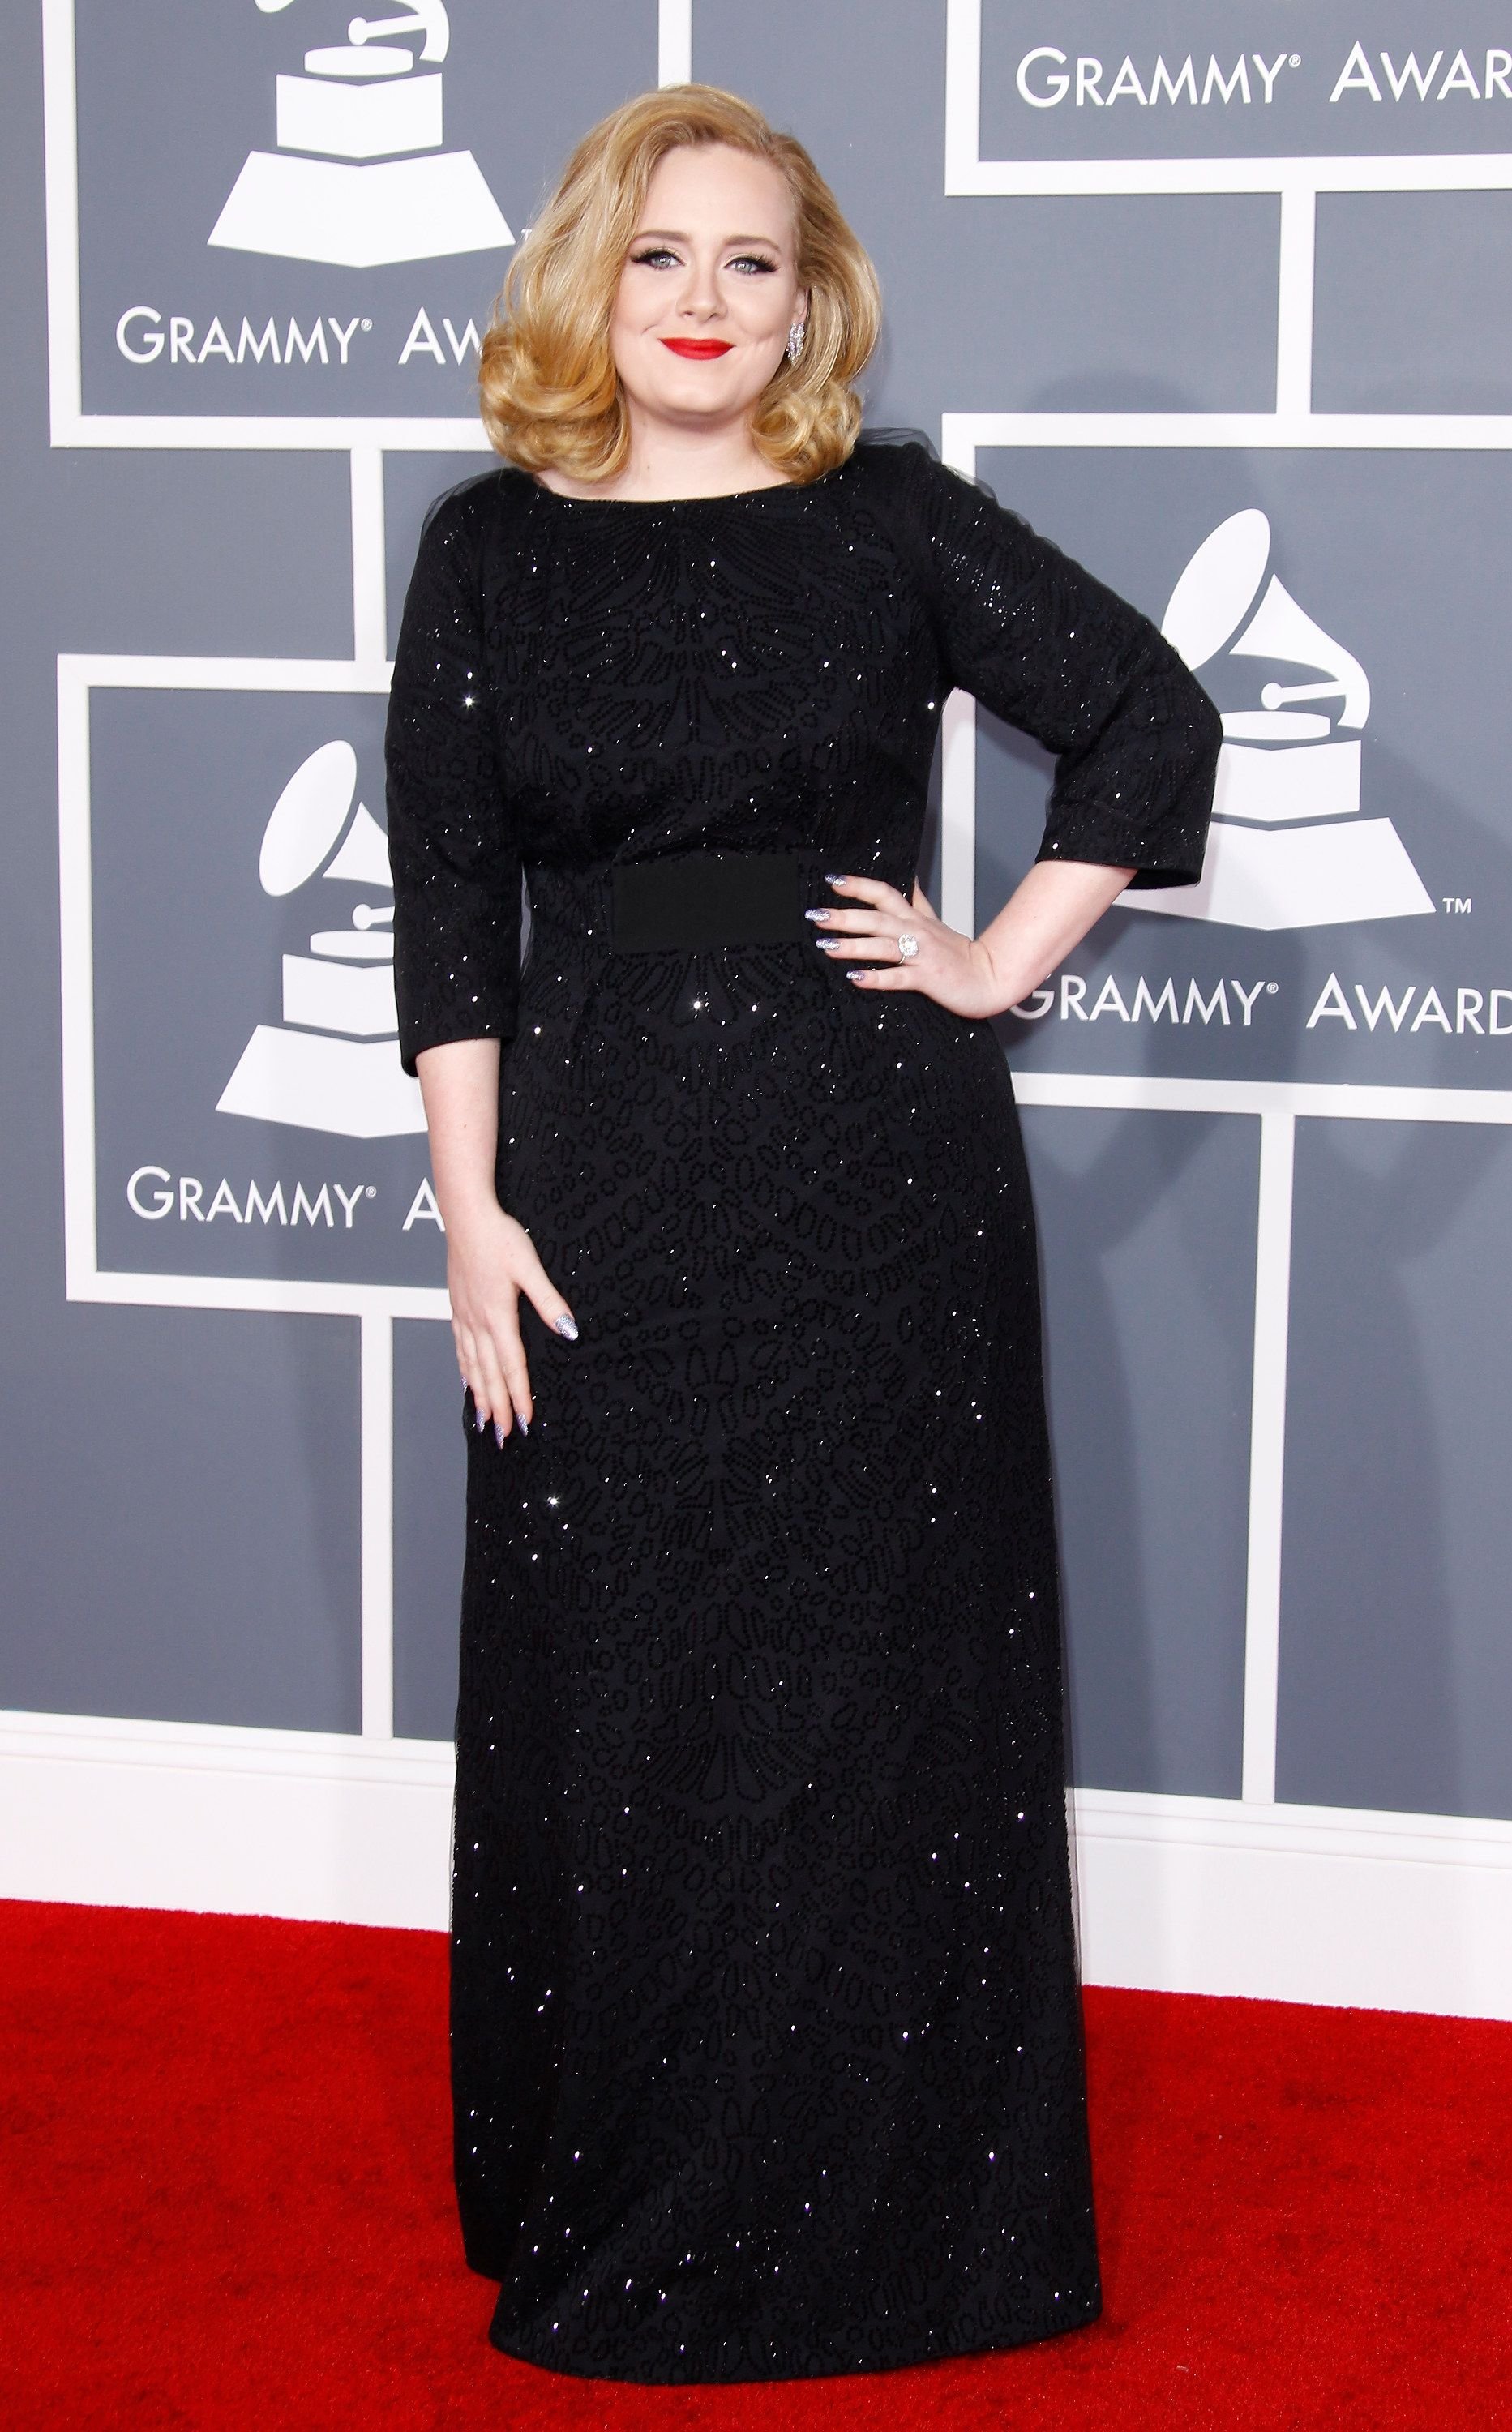 Adele at the 54th Annual Grammy Awards on February 12, 2012, in Los Angeles, California | Photo: Dan MacMedan/WireImage/Getty Images